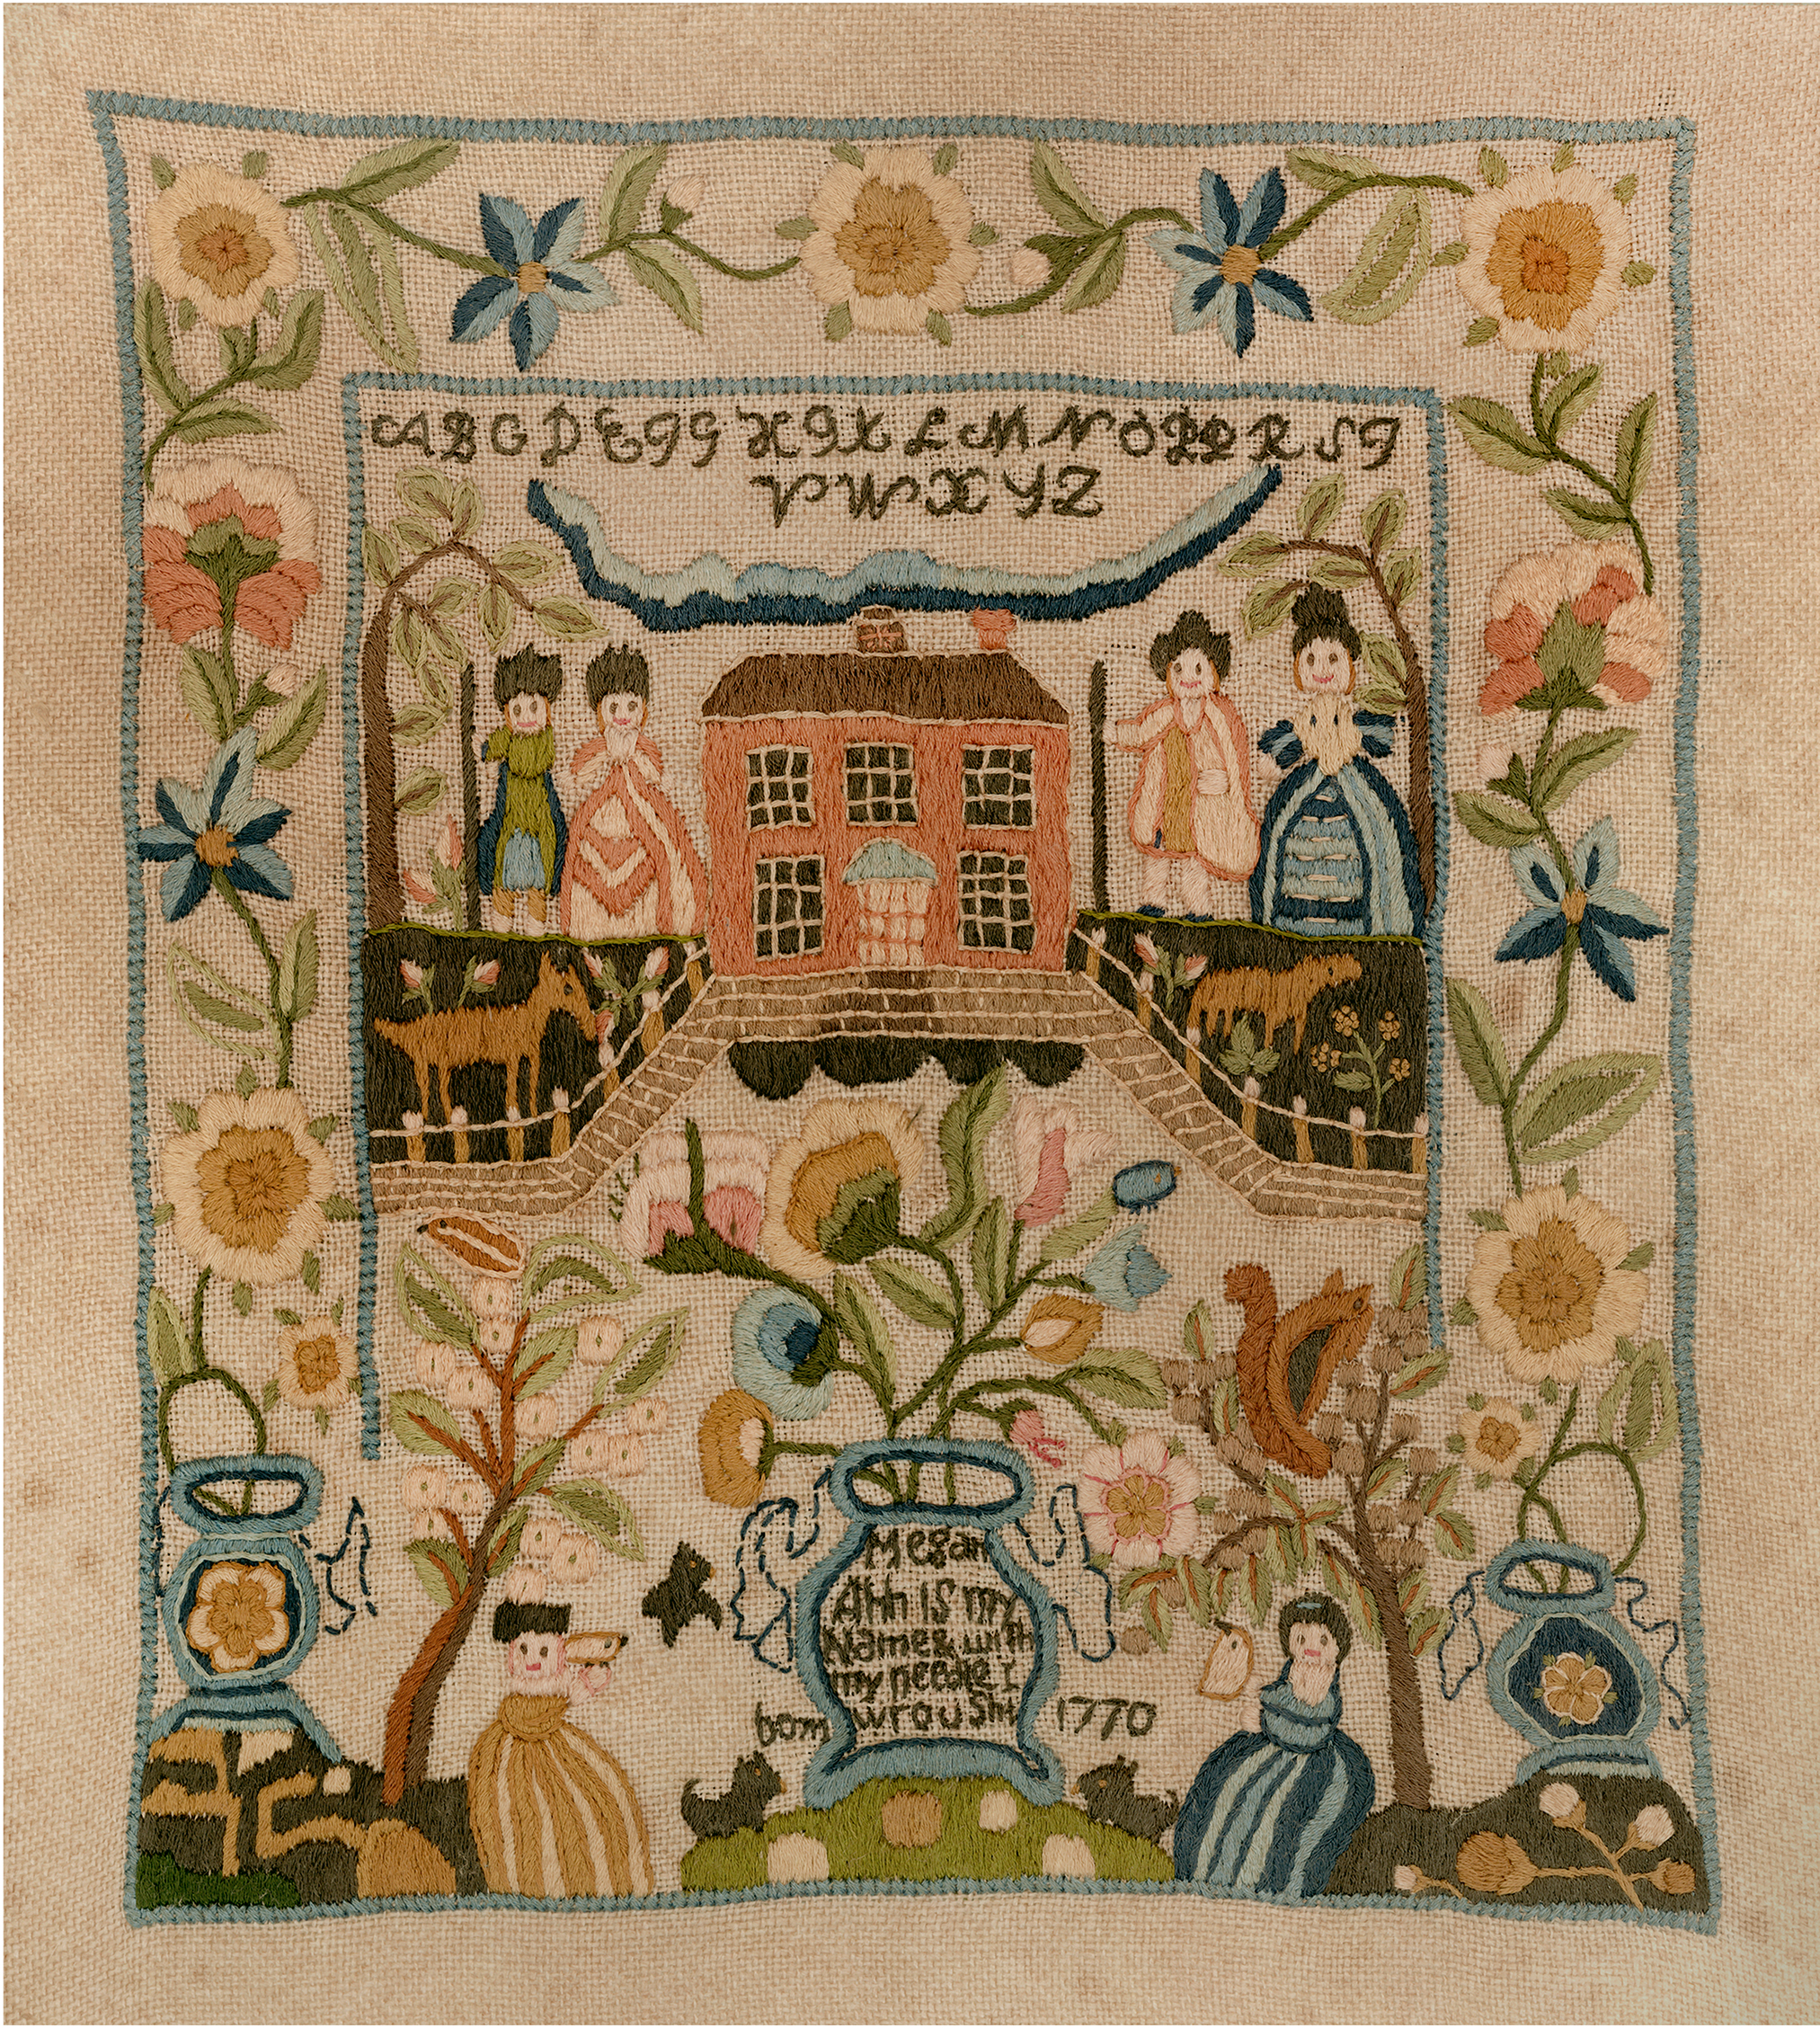 Sampler Prints Early American Megan Ann 1770 Antique Embroidery Need ...